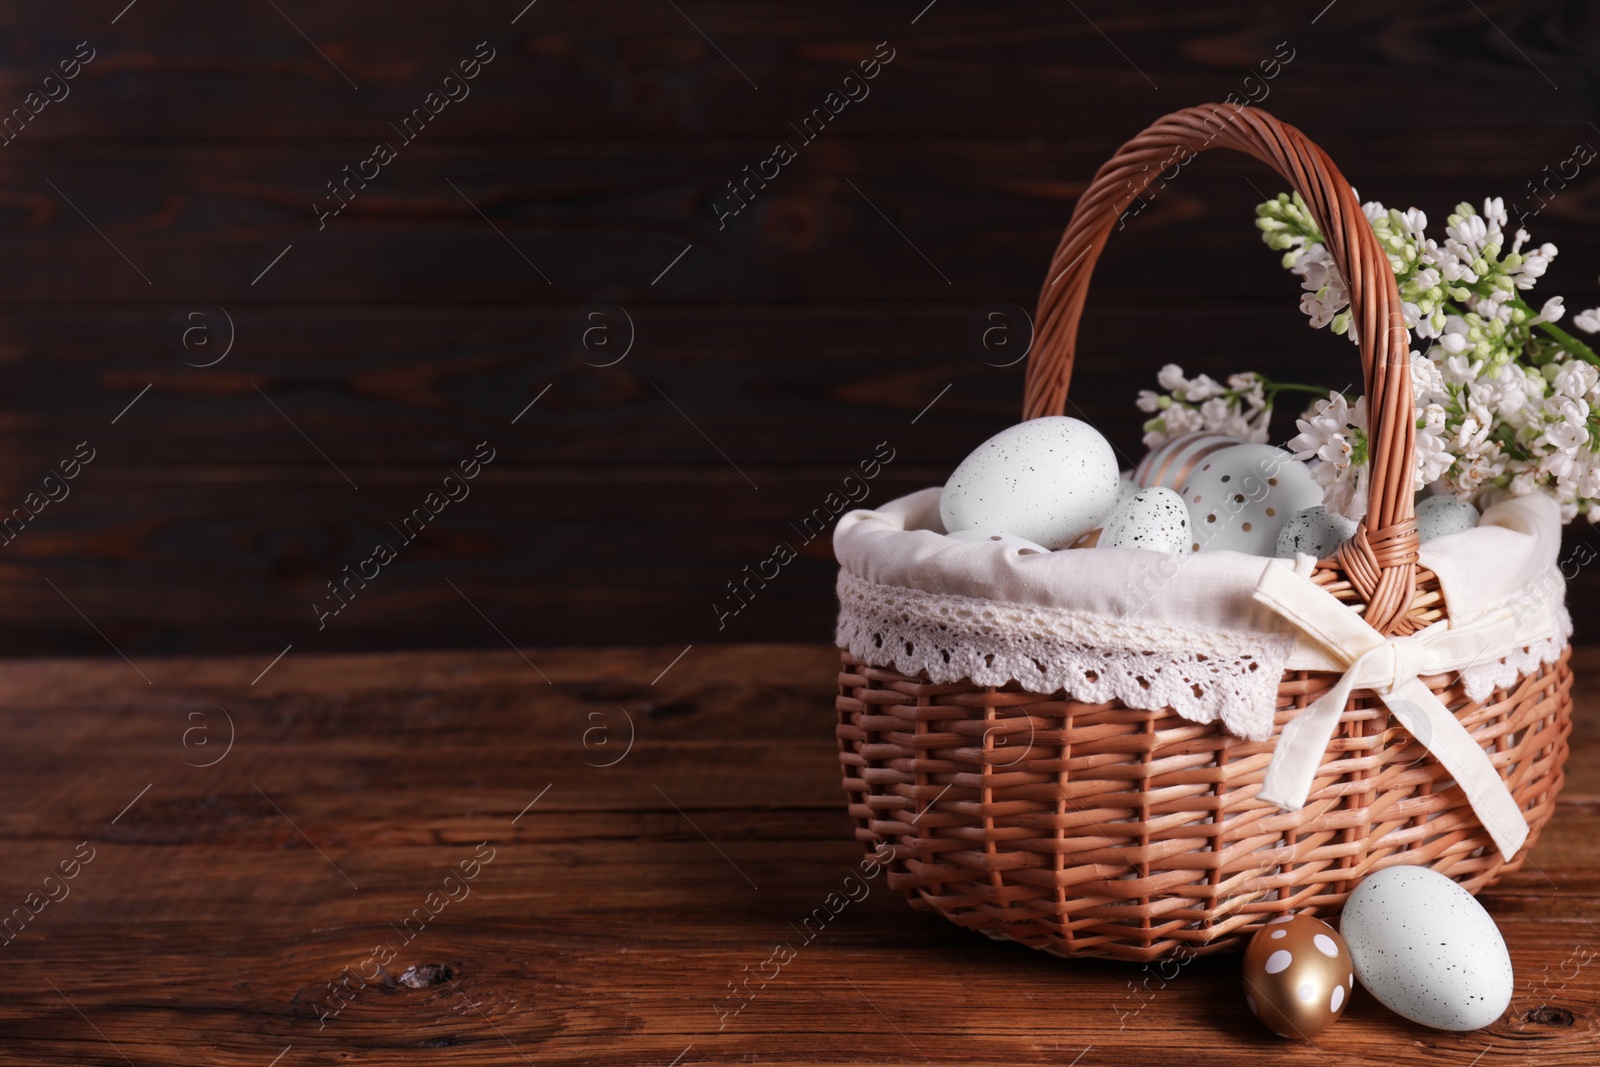 Photo of Wicker basket with festively decorated Easter eggs and white lilac flowers on wooden table. Space for text